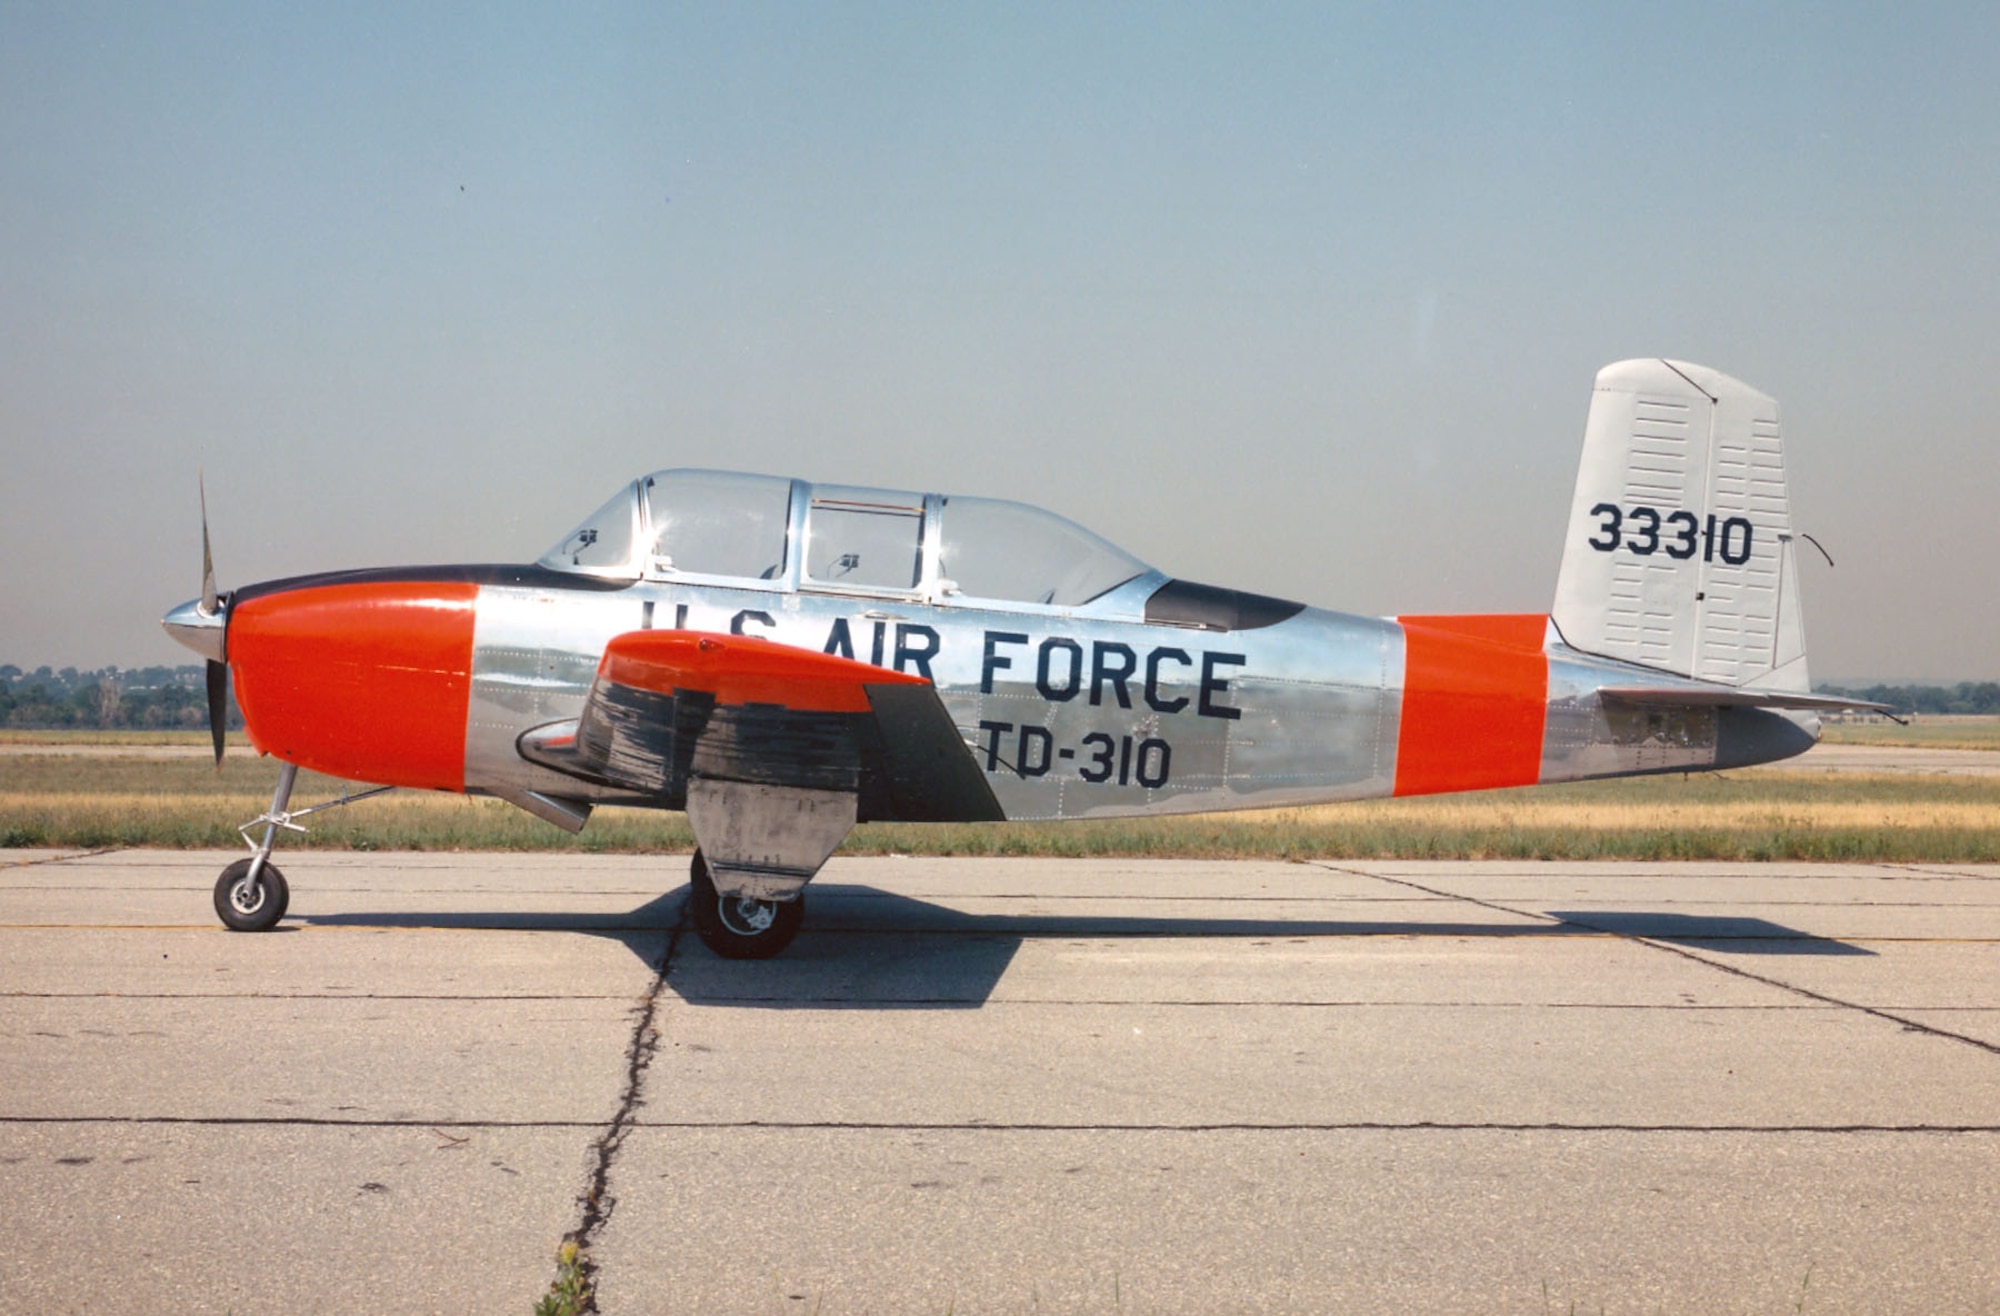 DAYTON, Ohio -- Beech T-34A Mentor at the National Museum of the United States Air Force. (U.S. Air Force photo)